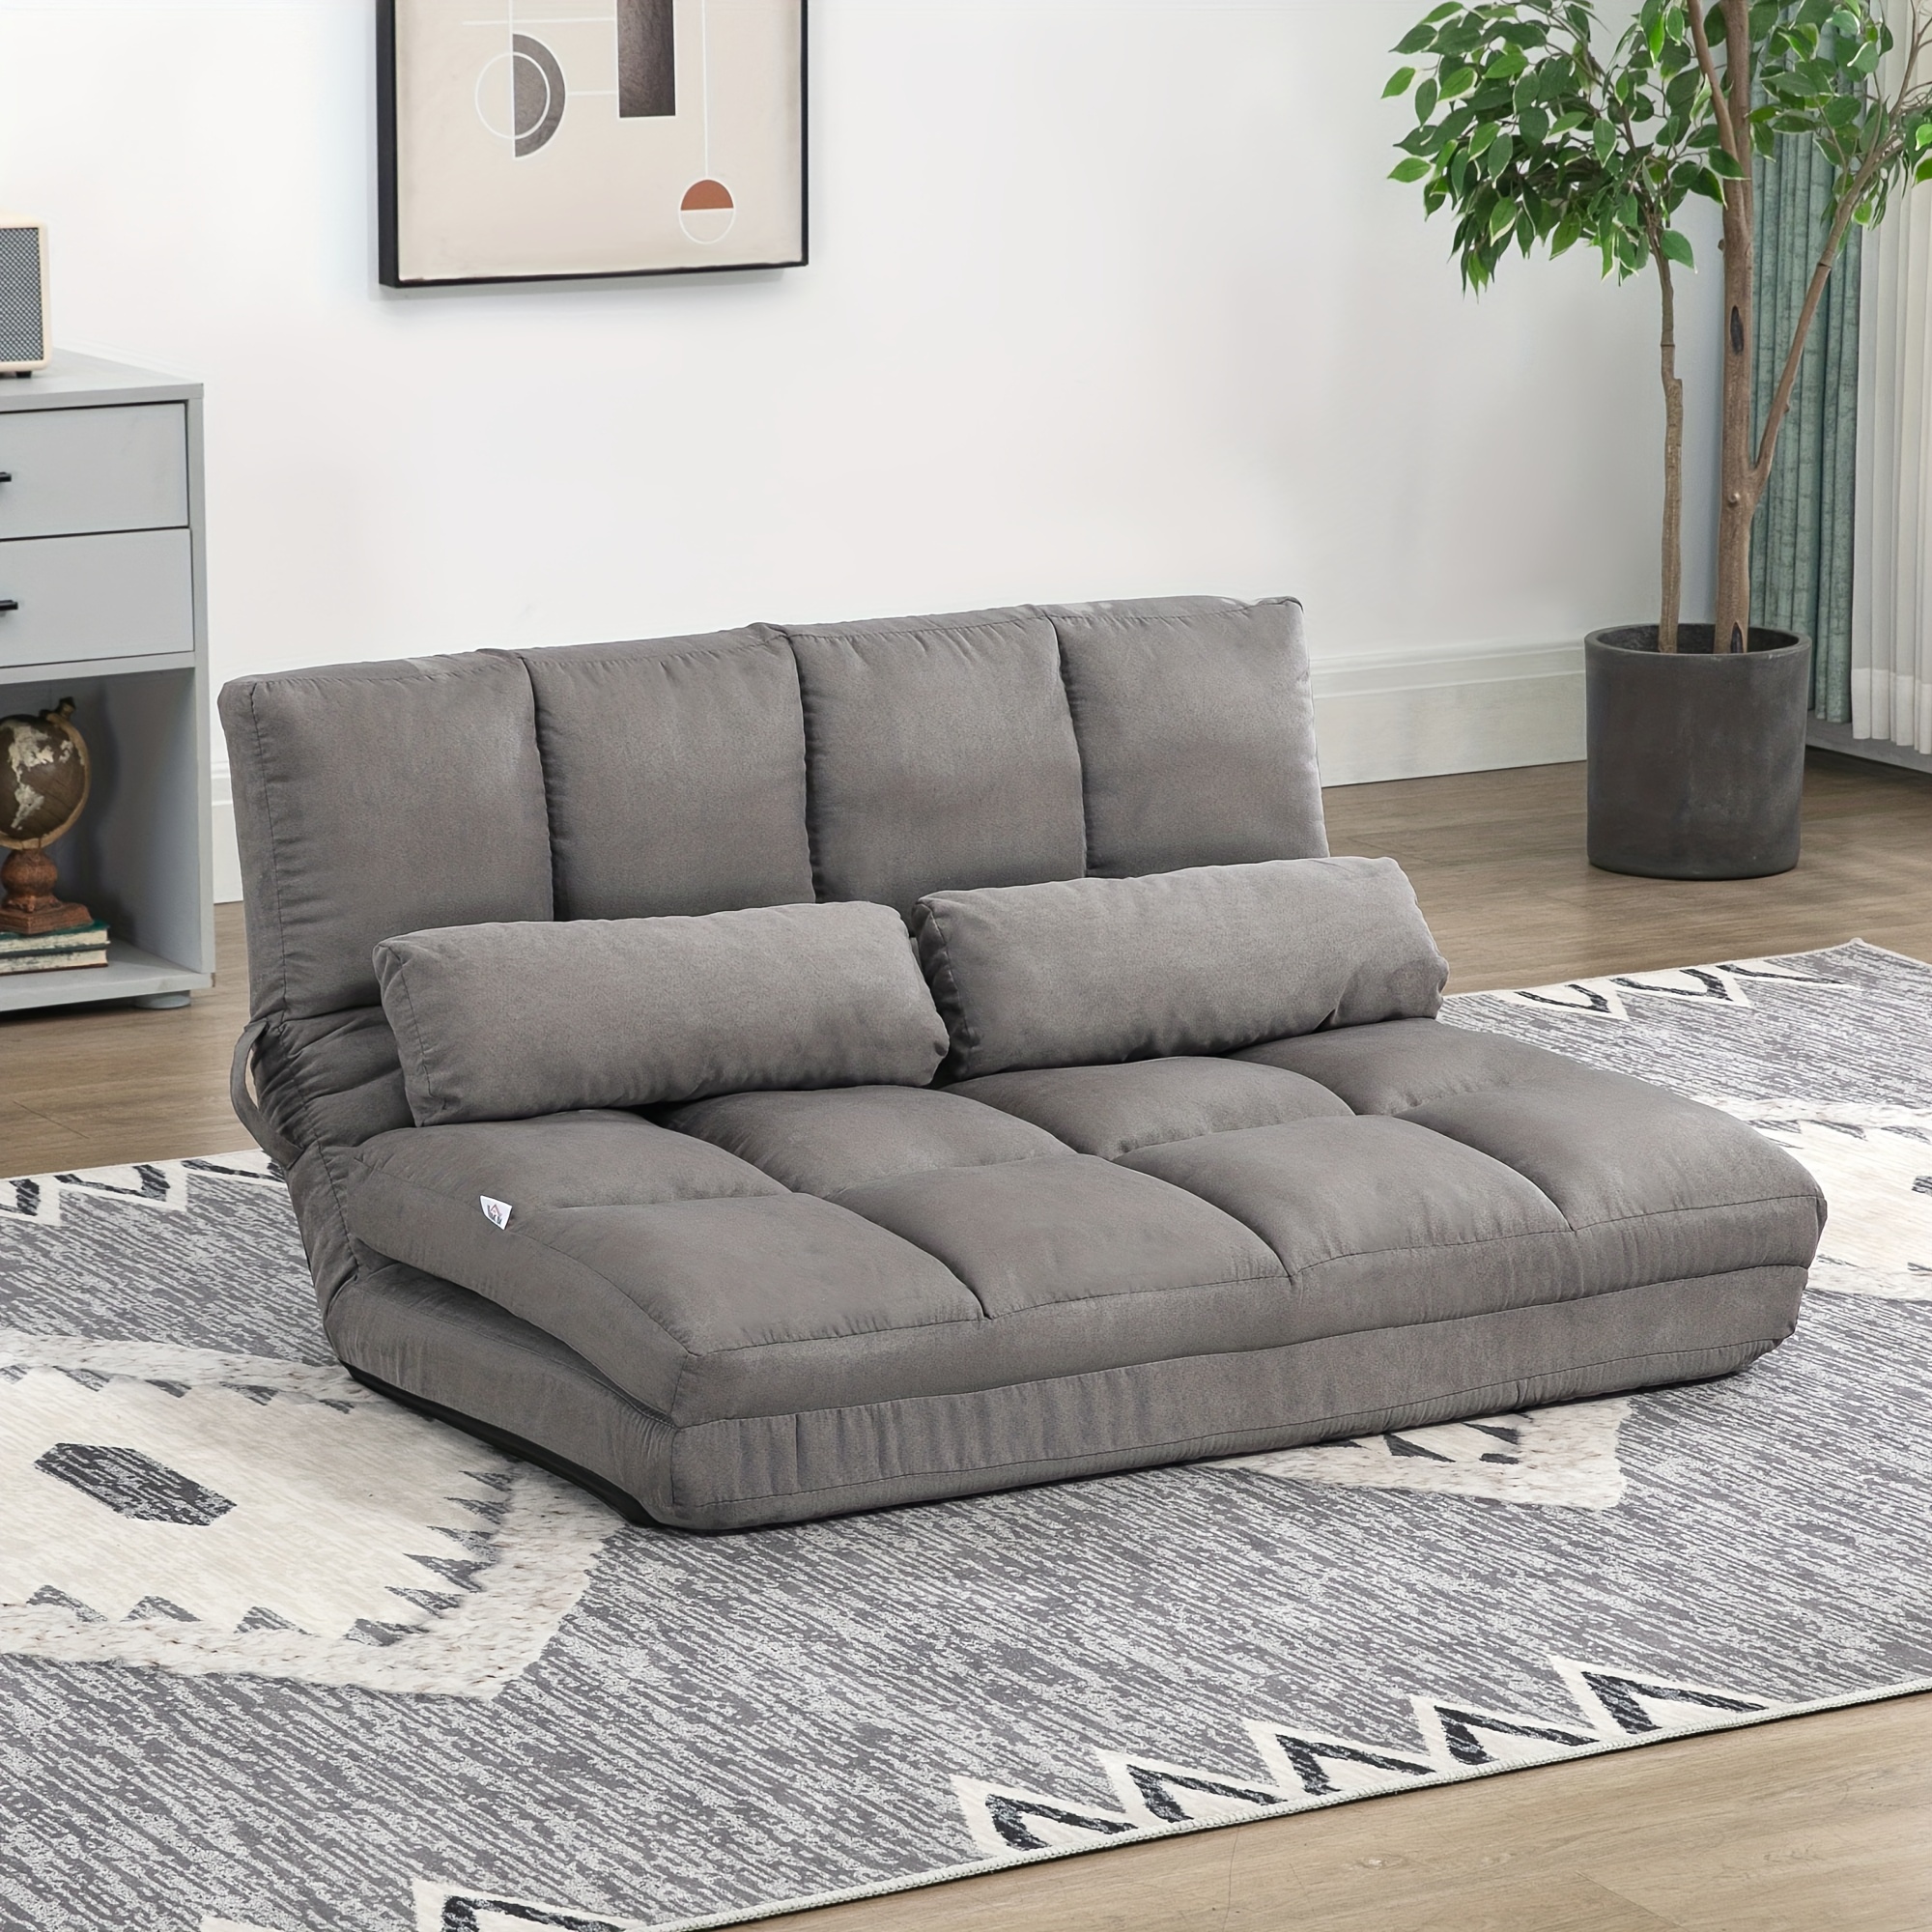 

Homcom Convertible Floor Sofa Chair, Folding Couch Bed, Guest Chaise Lounge With 2 Pillows, Adjustable Backrest And Headrest, 40.25" L, Dark Gray